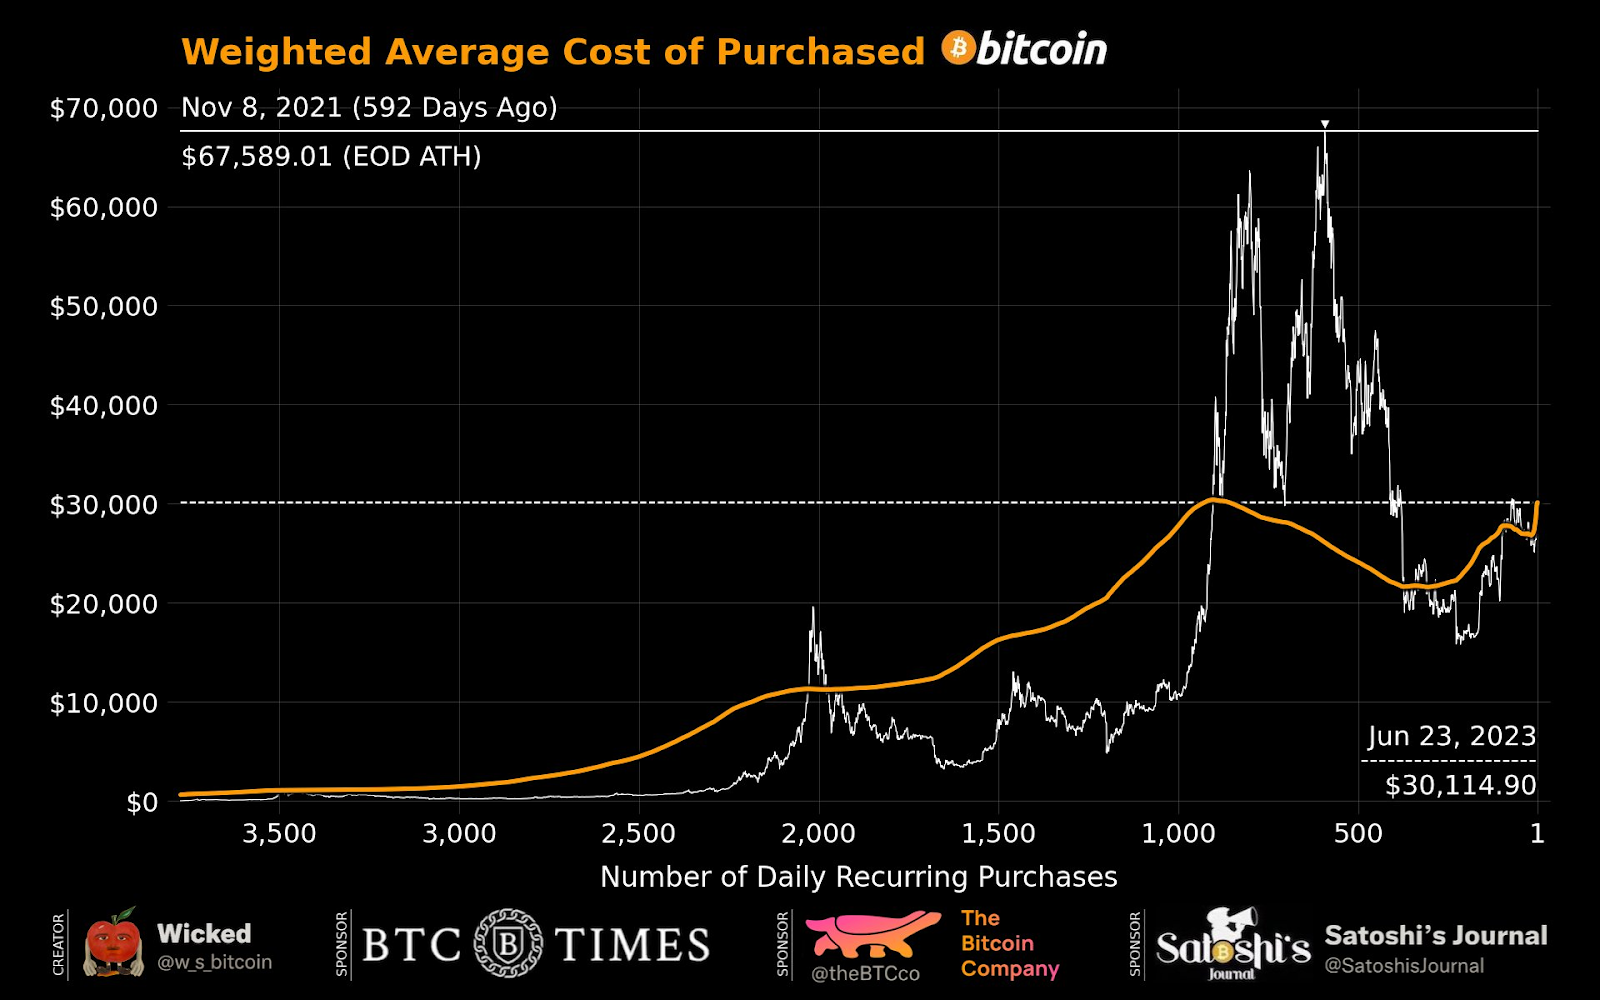 Weighted averaged cost of purchased Bitcoin